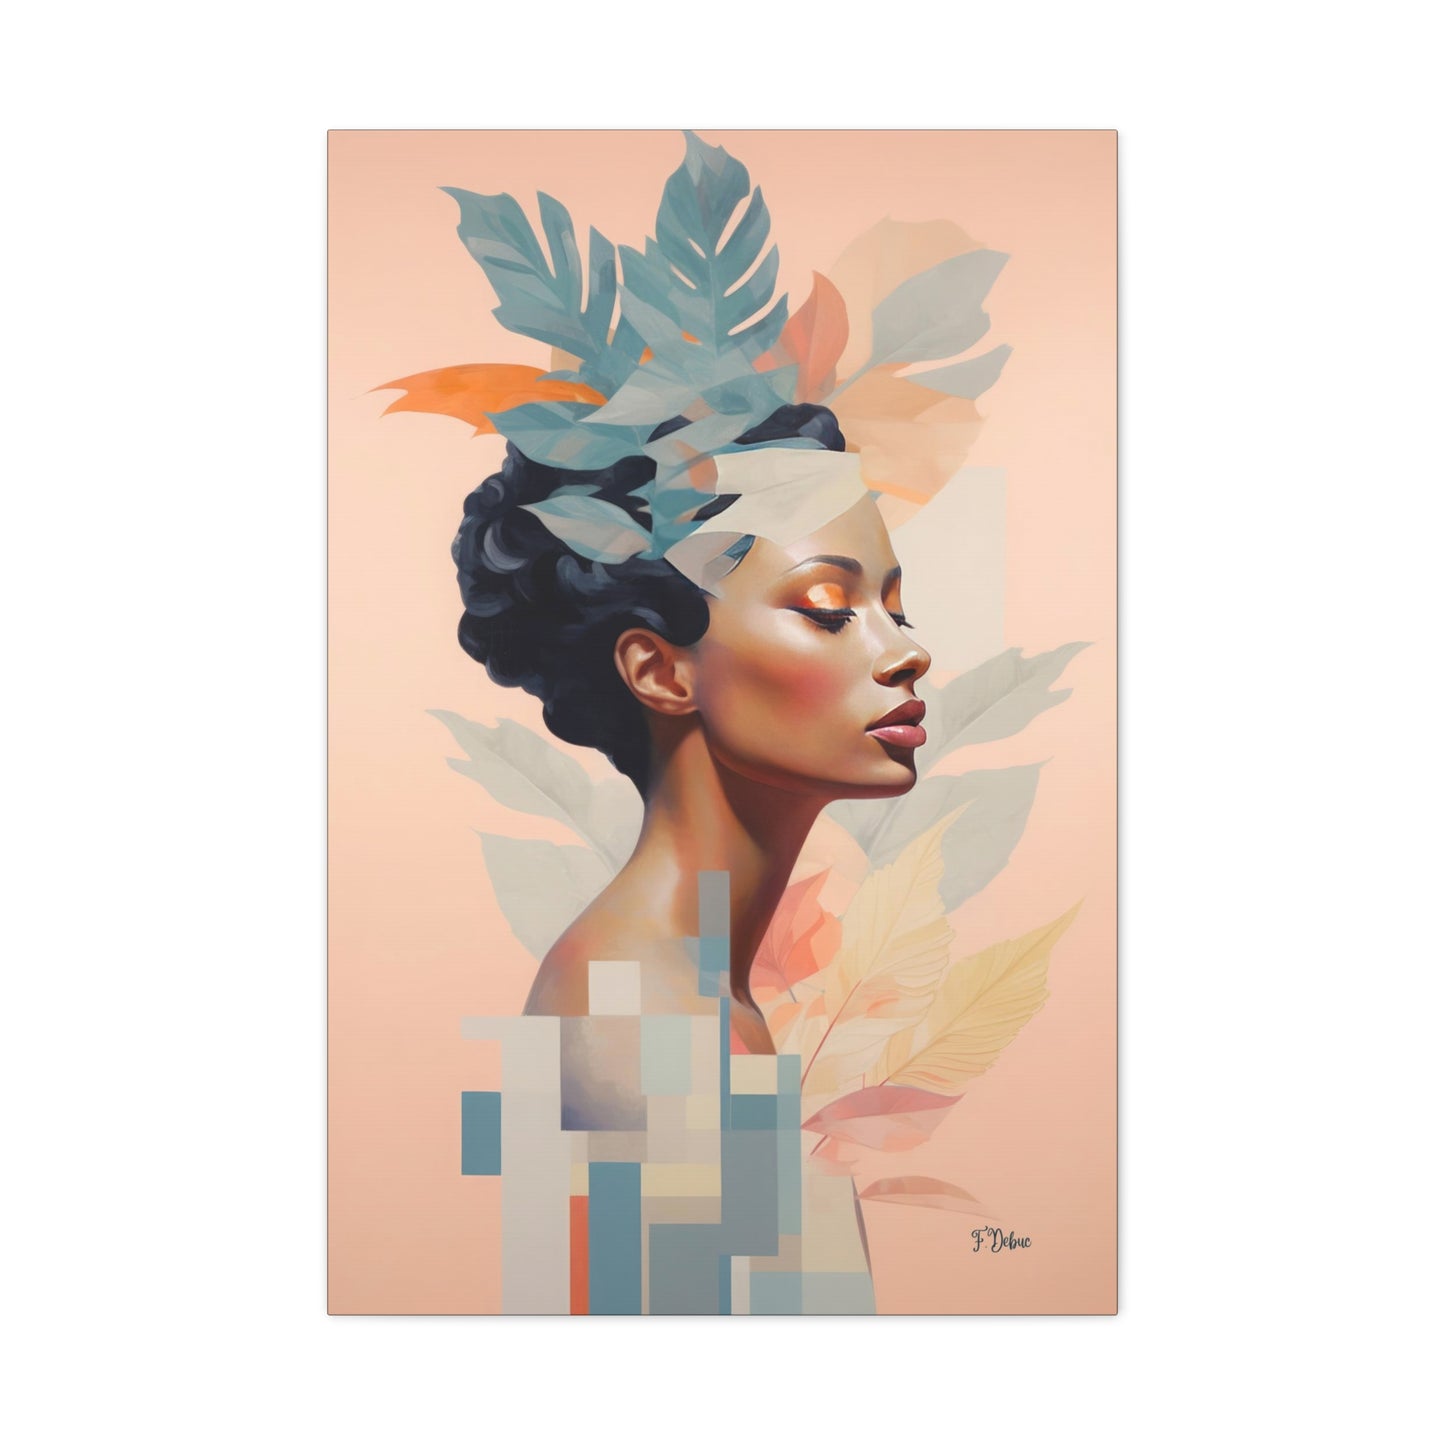 Our wall artwork print showcases a woman with leaves on her head, a fusion of minimalist charm and natural beauty.